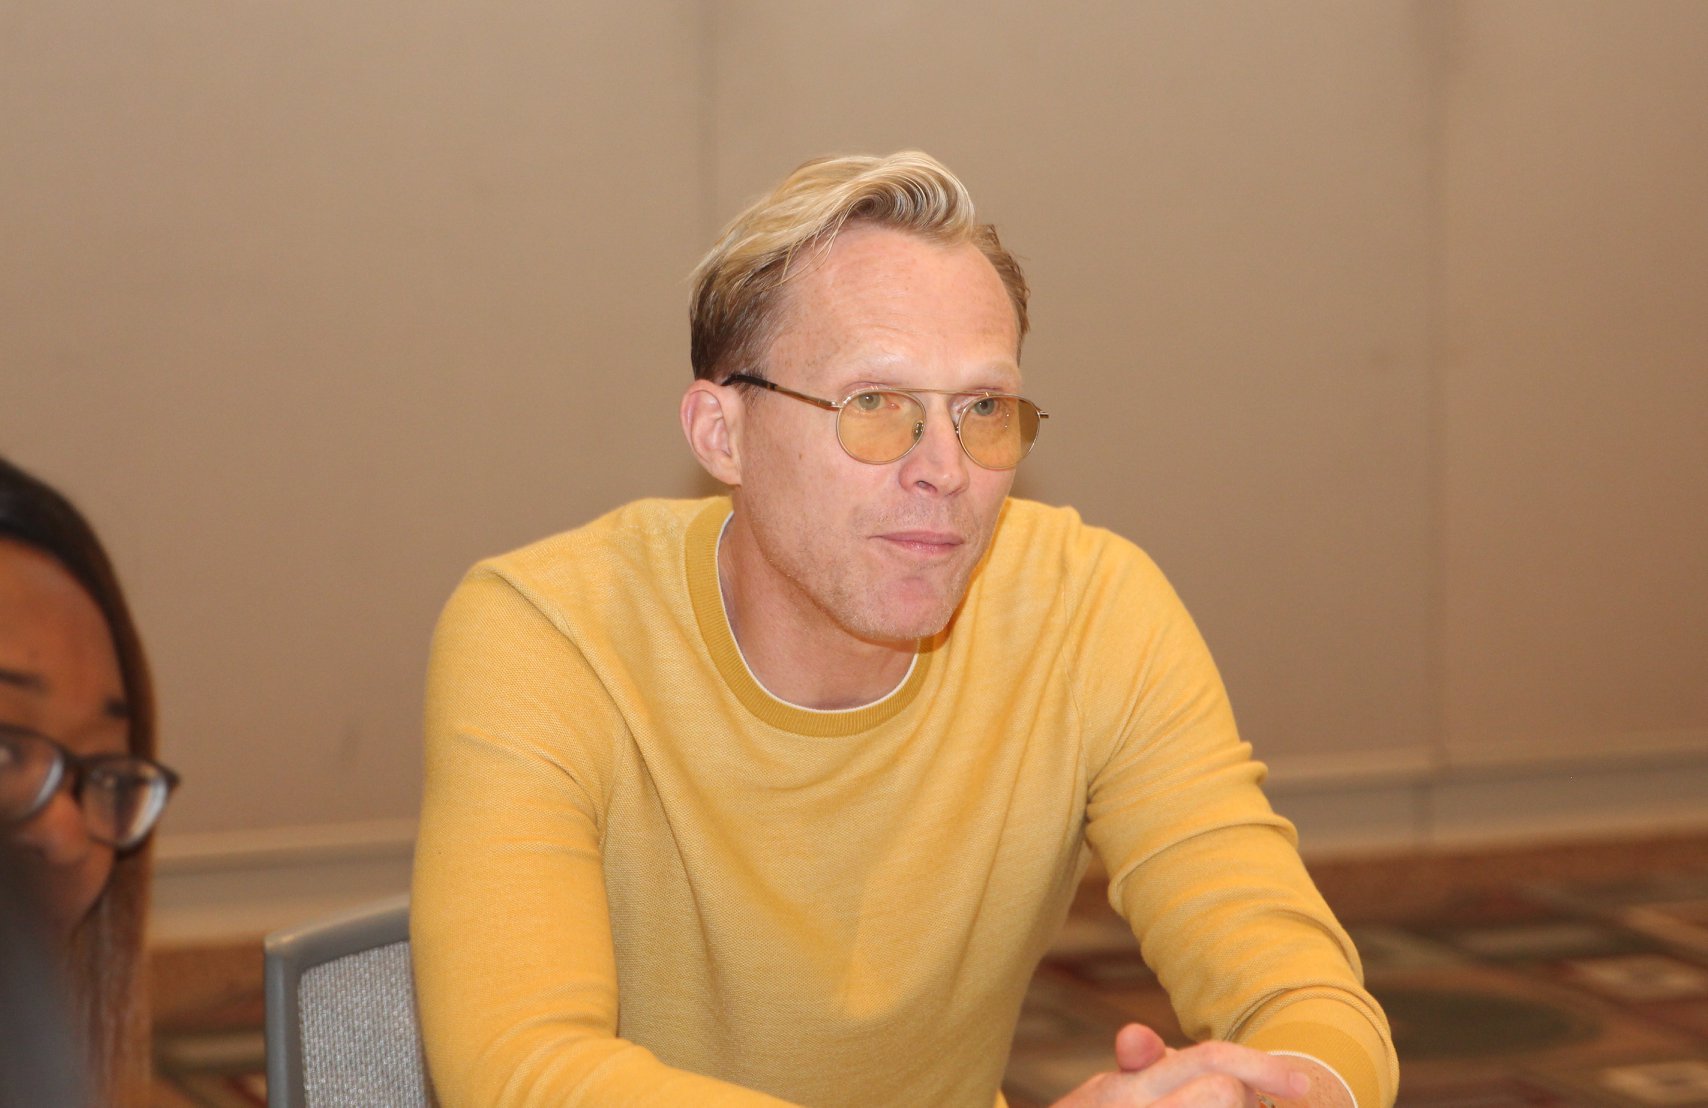 Exclusive Interview with Paul Bettany #HanSoloEvent #HanSolo